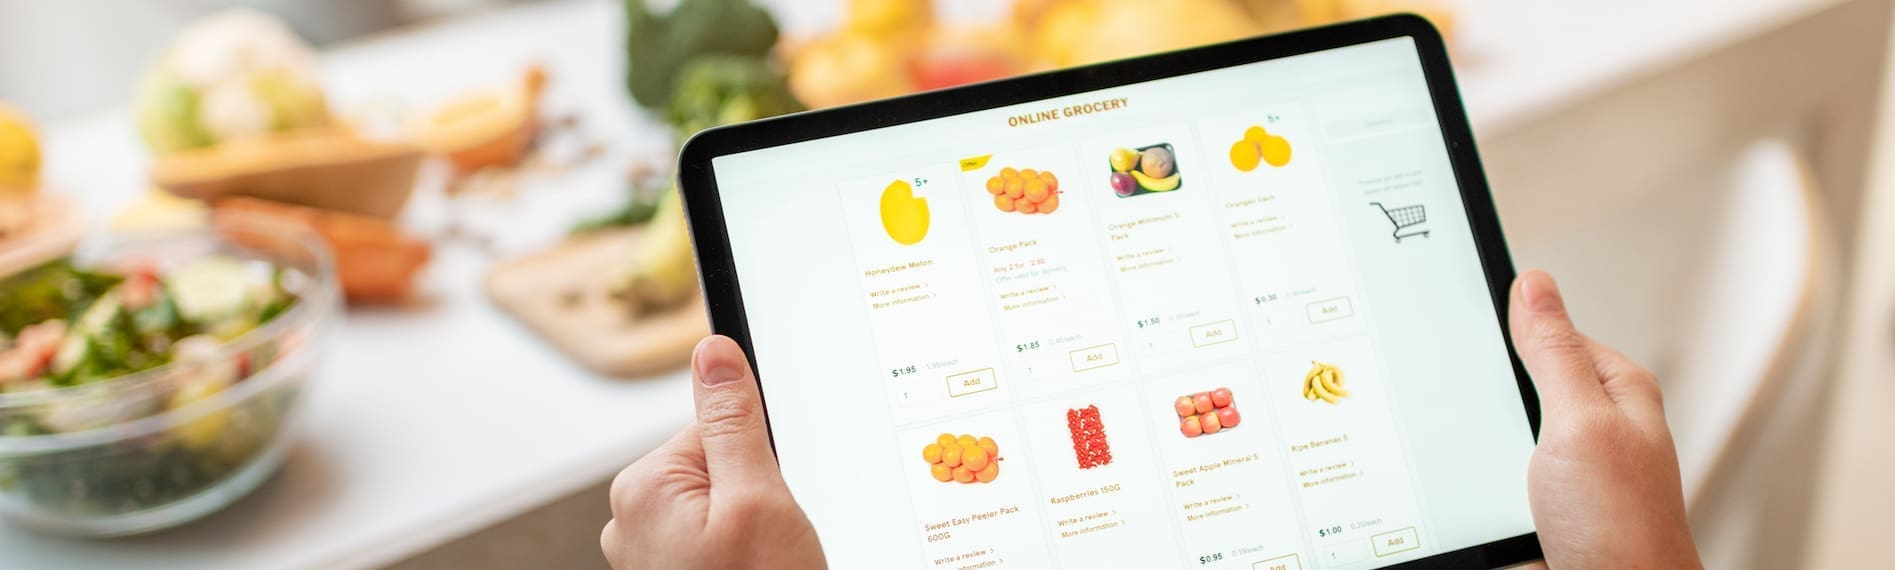 Consumer Trends in Online Grocery Retail